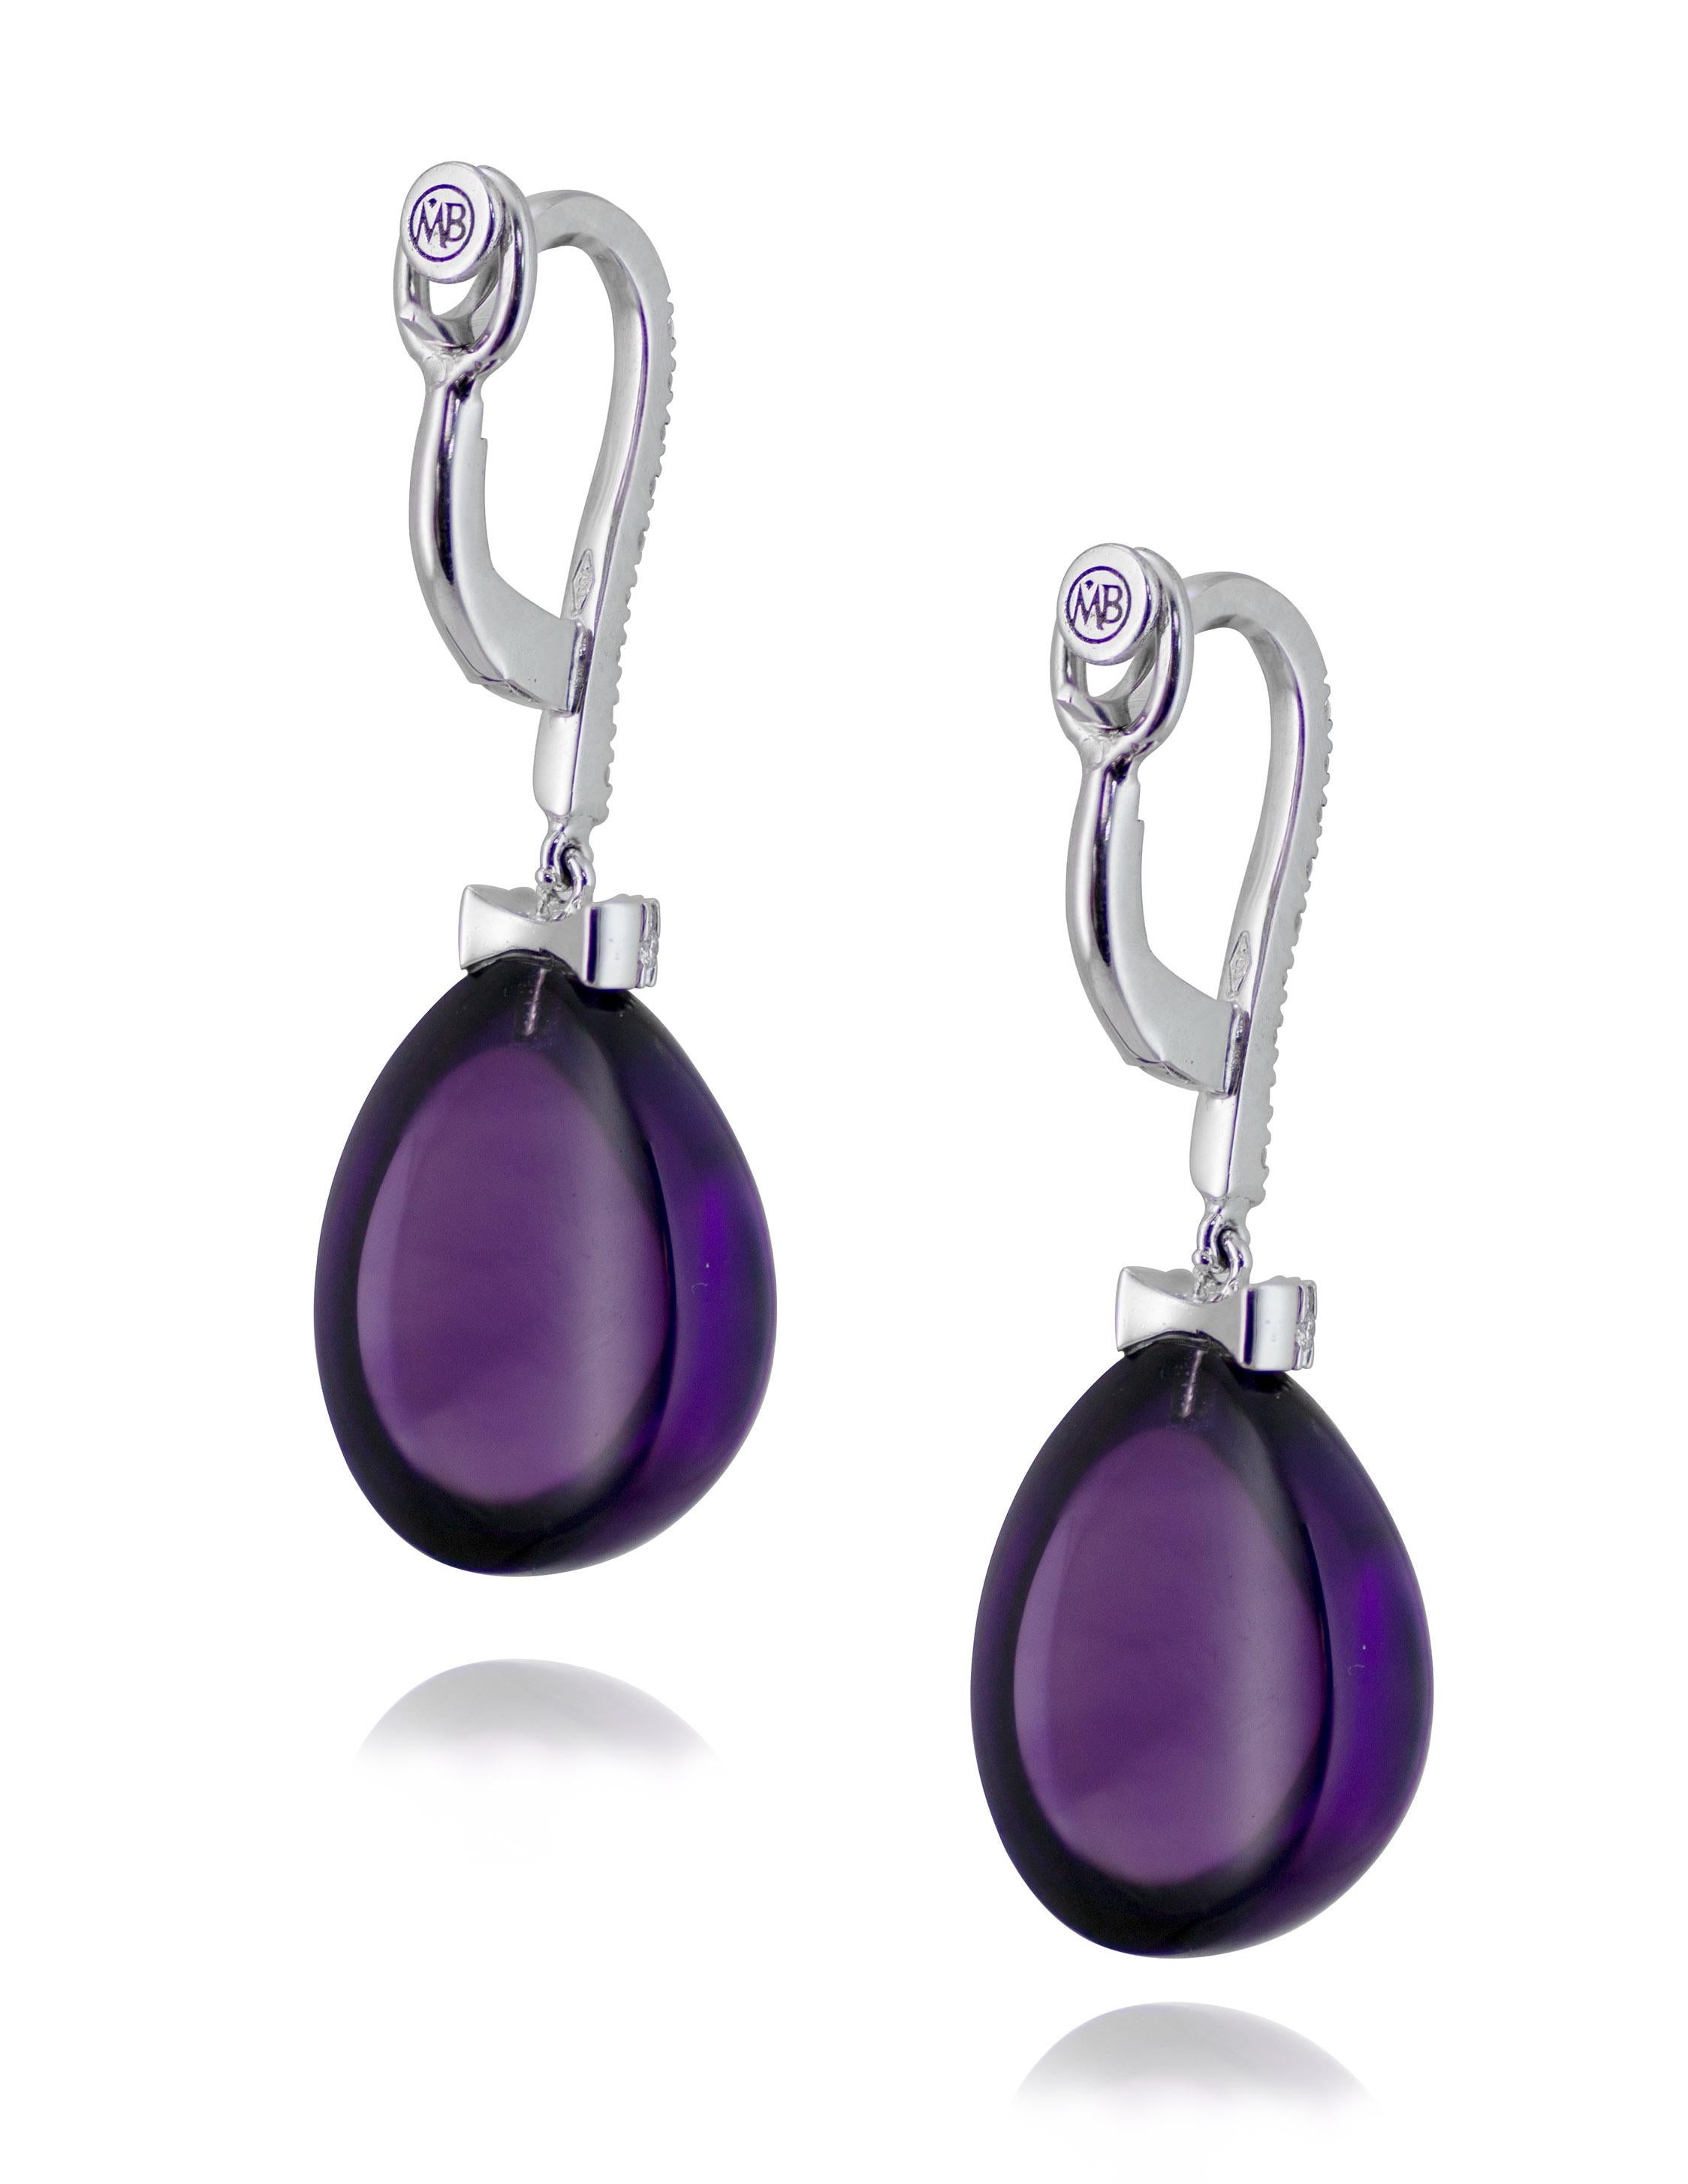 Handcrafted in Margherita Burgener family workshop, based in Italy,  the Gattopardo earrings are characterized by  cabochon cut pendant drops in Amethyst  and a hook in white gold set with high quality diamonds. 

Gattopardo earrings are inspired by